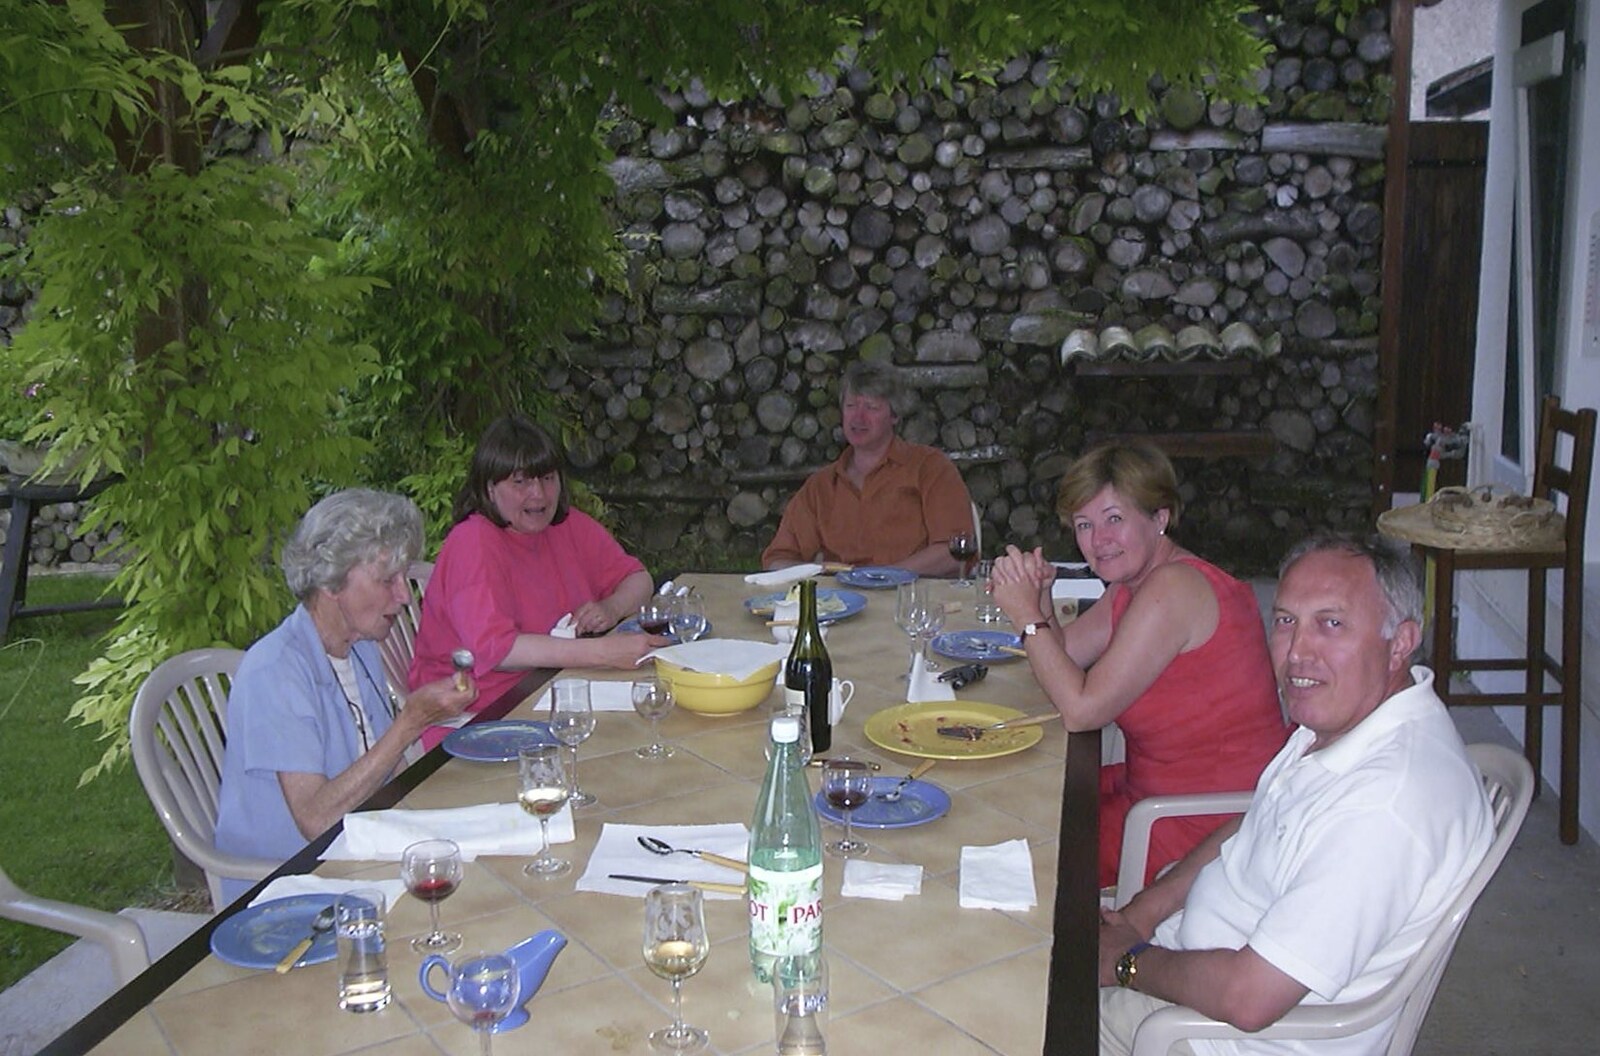 Another dinner around the table in the garden from A Short Holiday in Chivres, Burgundy, France - 21st July 2001